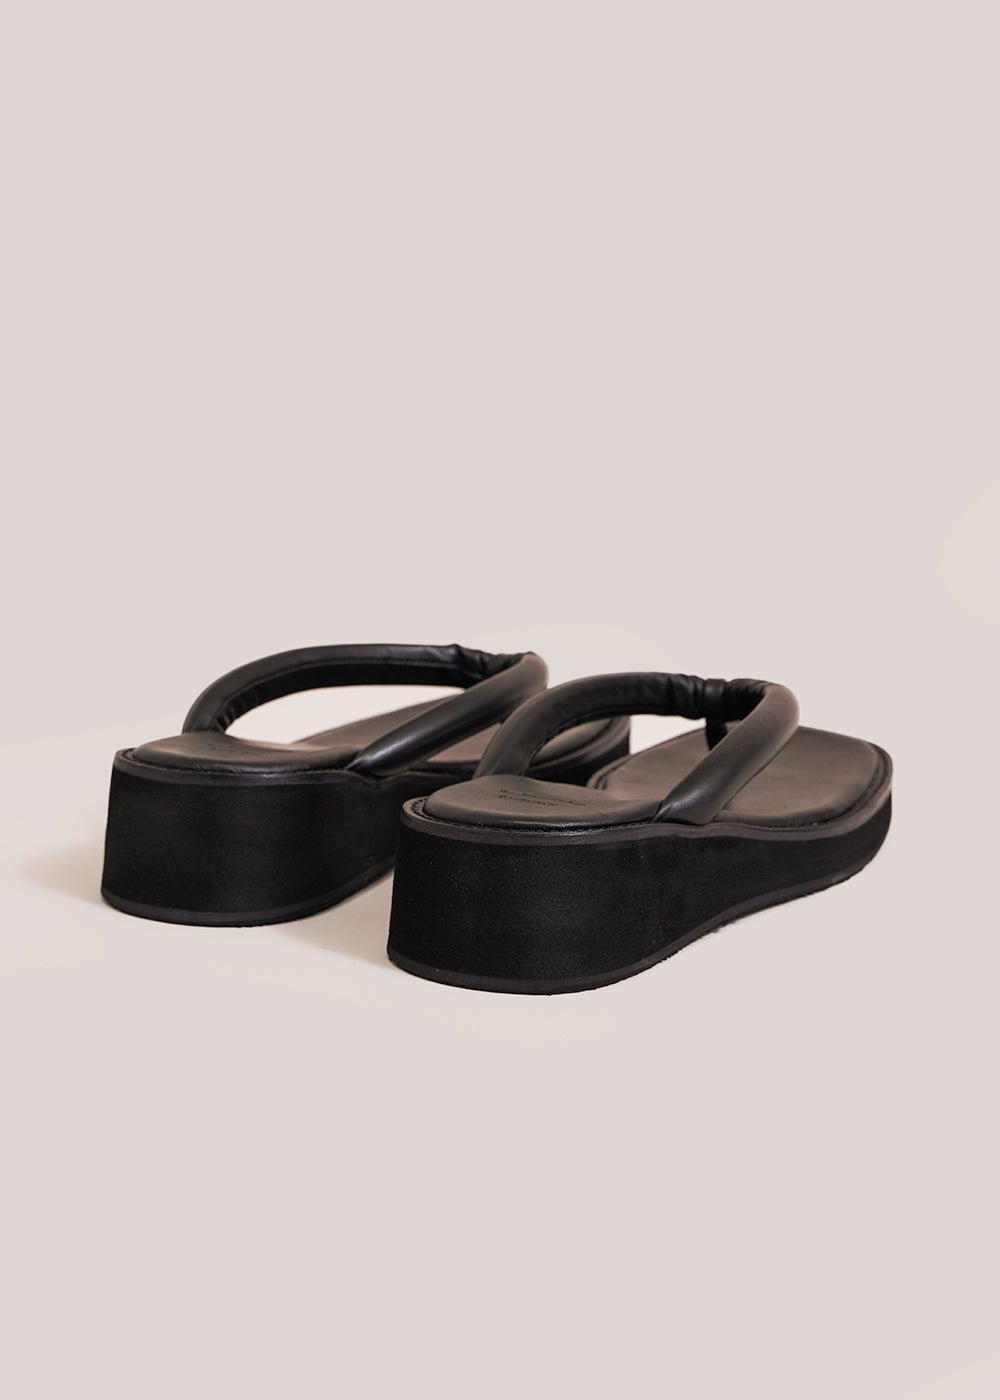 Padded Strap Flip Flop in Black by AMOMENTO – New Classics Studios